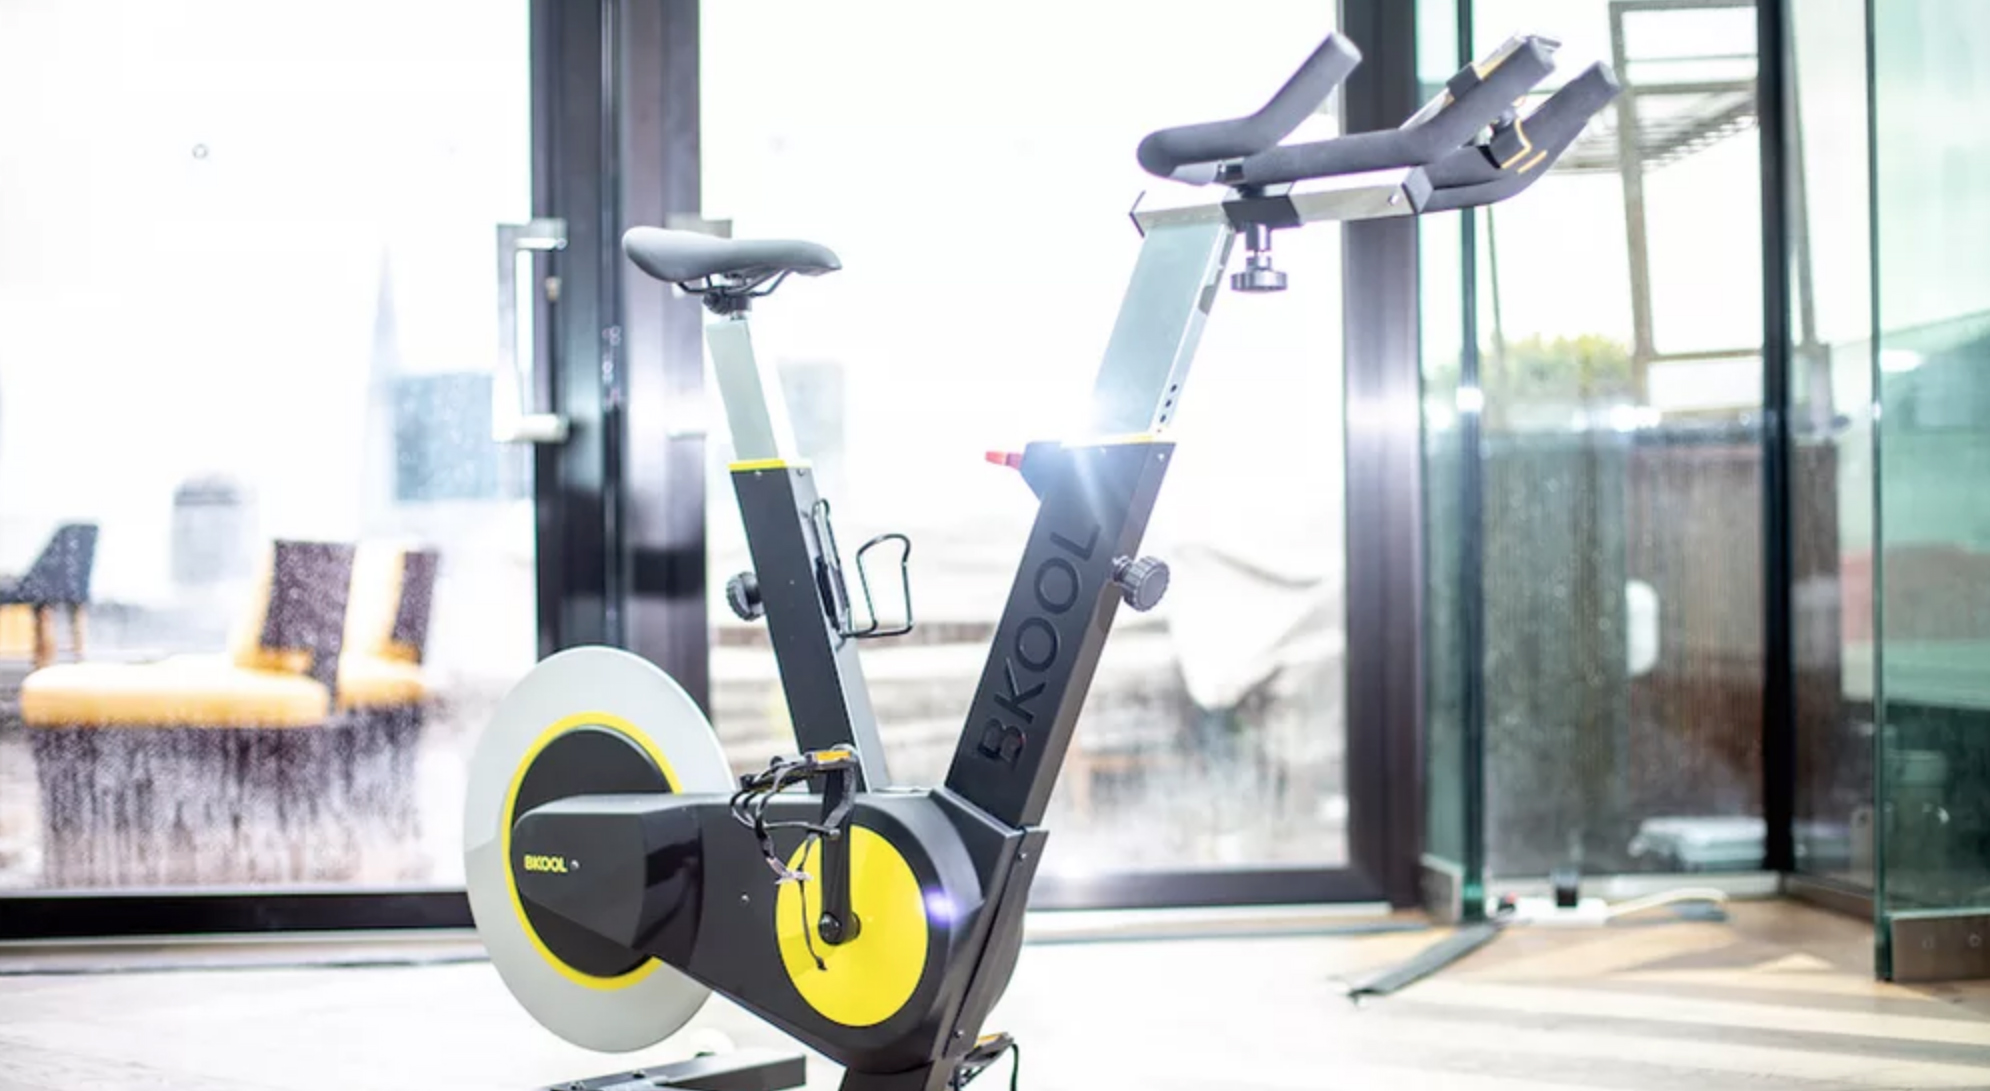  Peloton App Free With Bike Purchase for Burn Fat fast